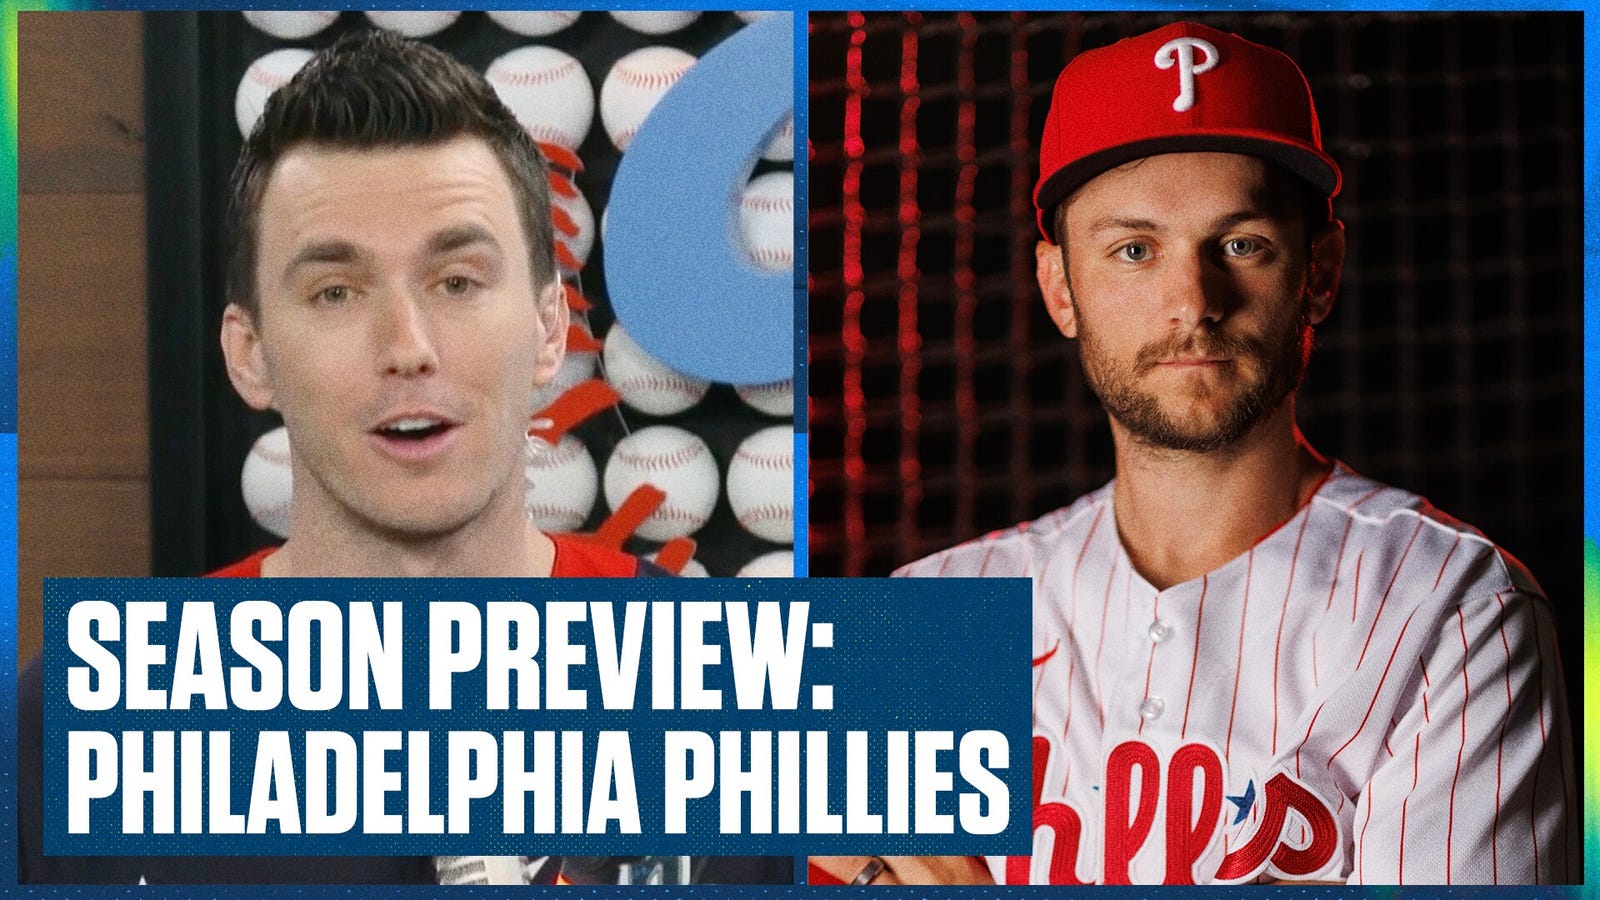 Phillies season preview: Will the lineup get them back to the World Series?